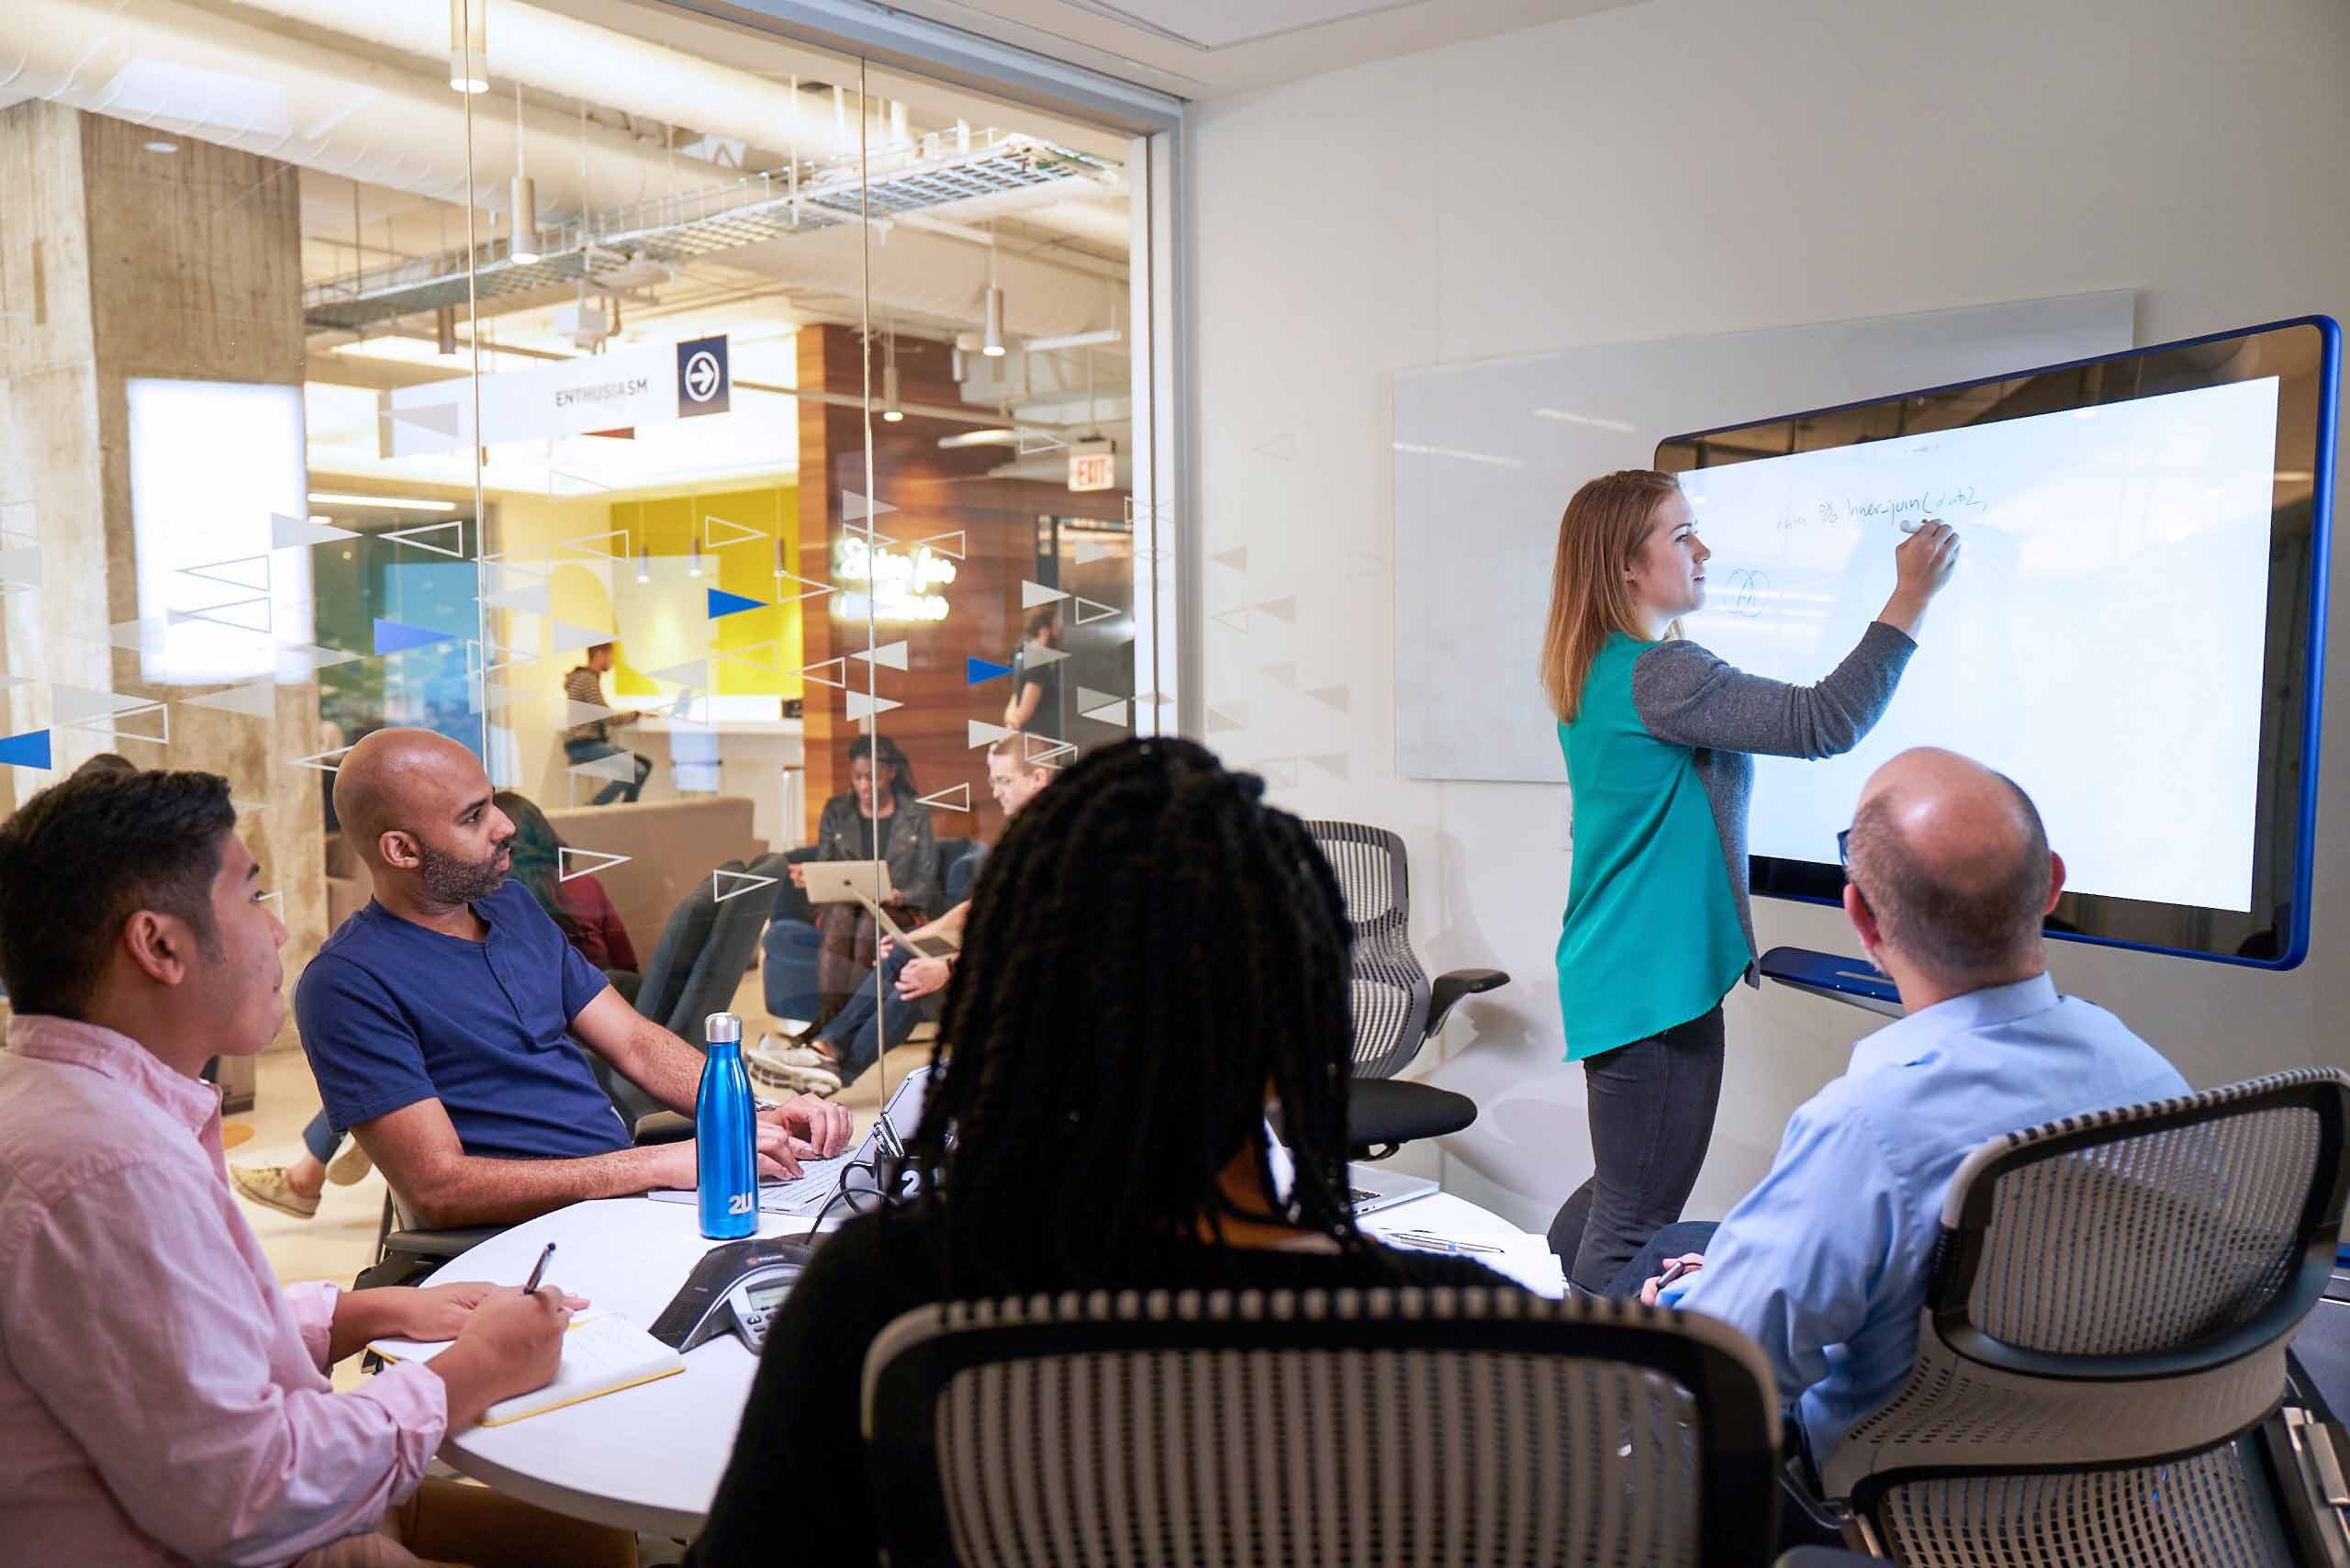 Woman writing on a digital whiteboard addresses colleagues during a meeting